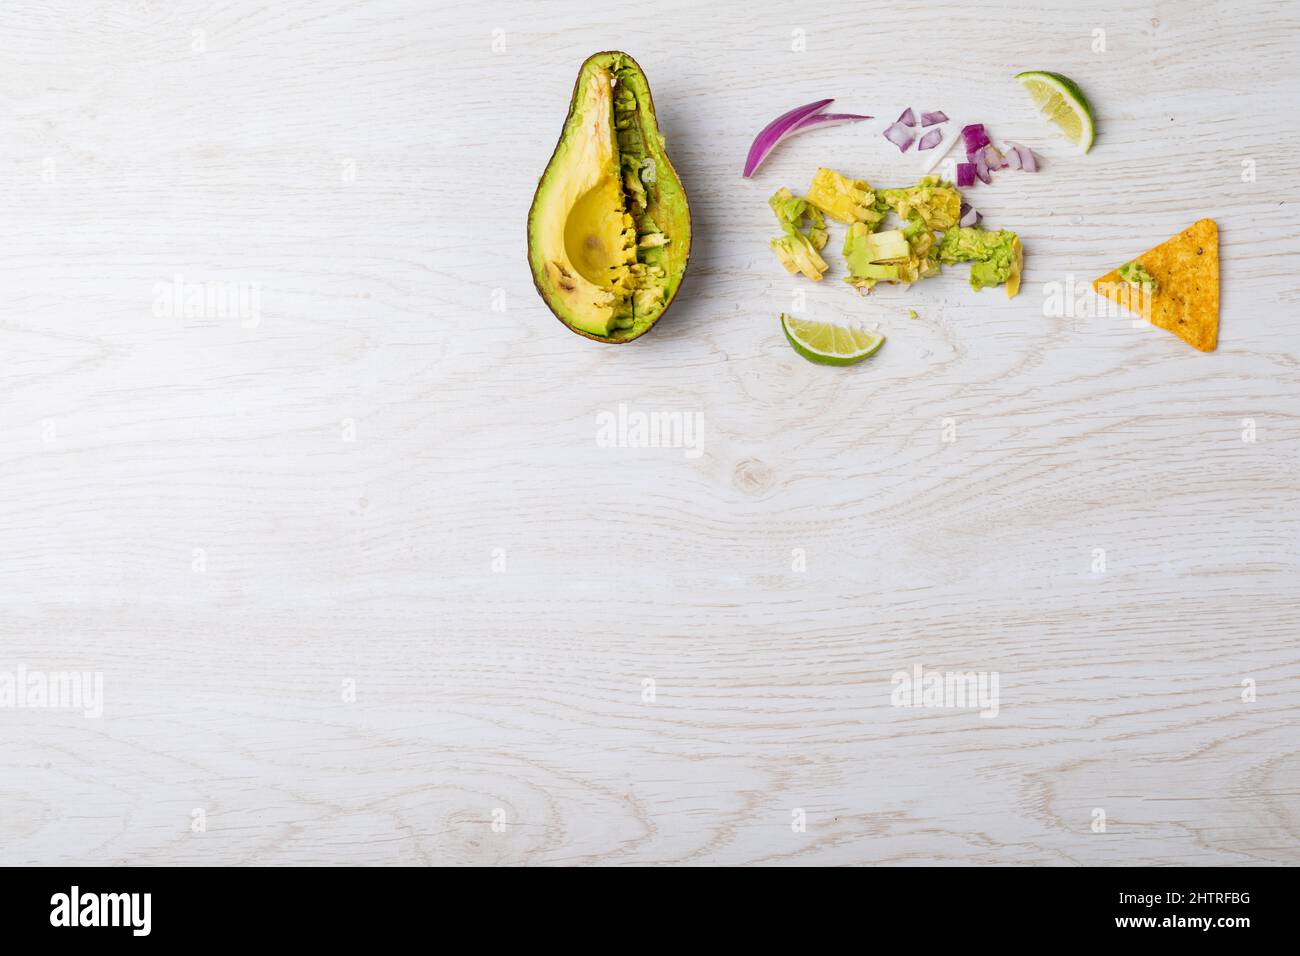 Overhead view of halved avocado and ingredients on table with empty space Stock Photo